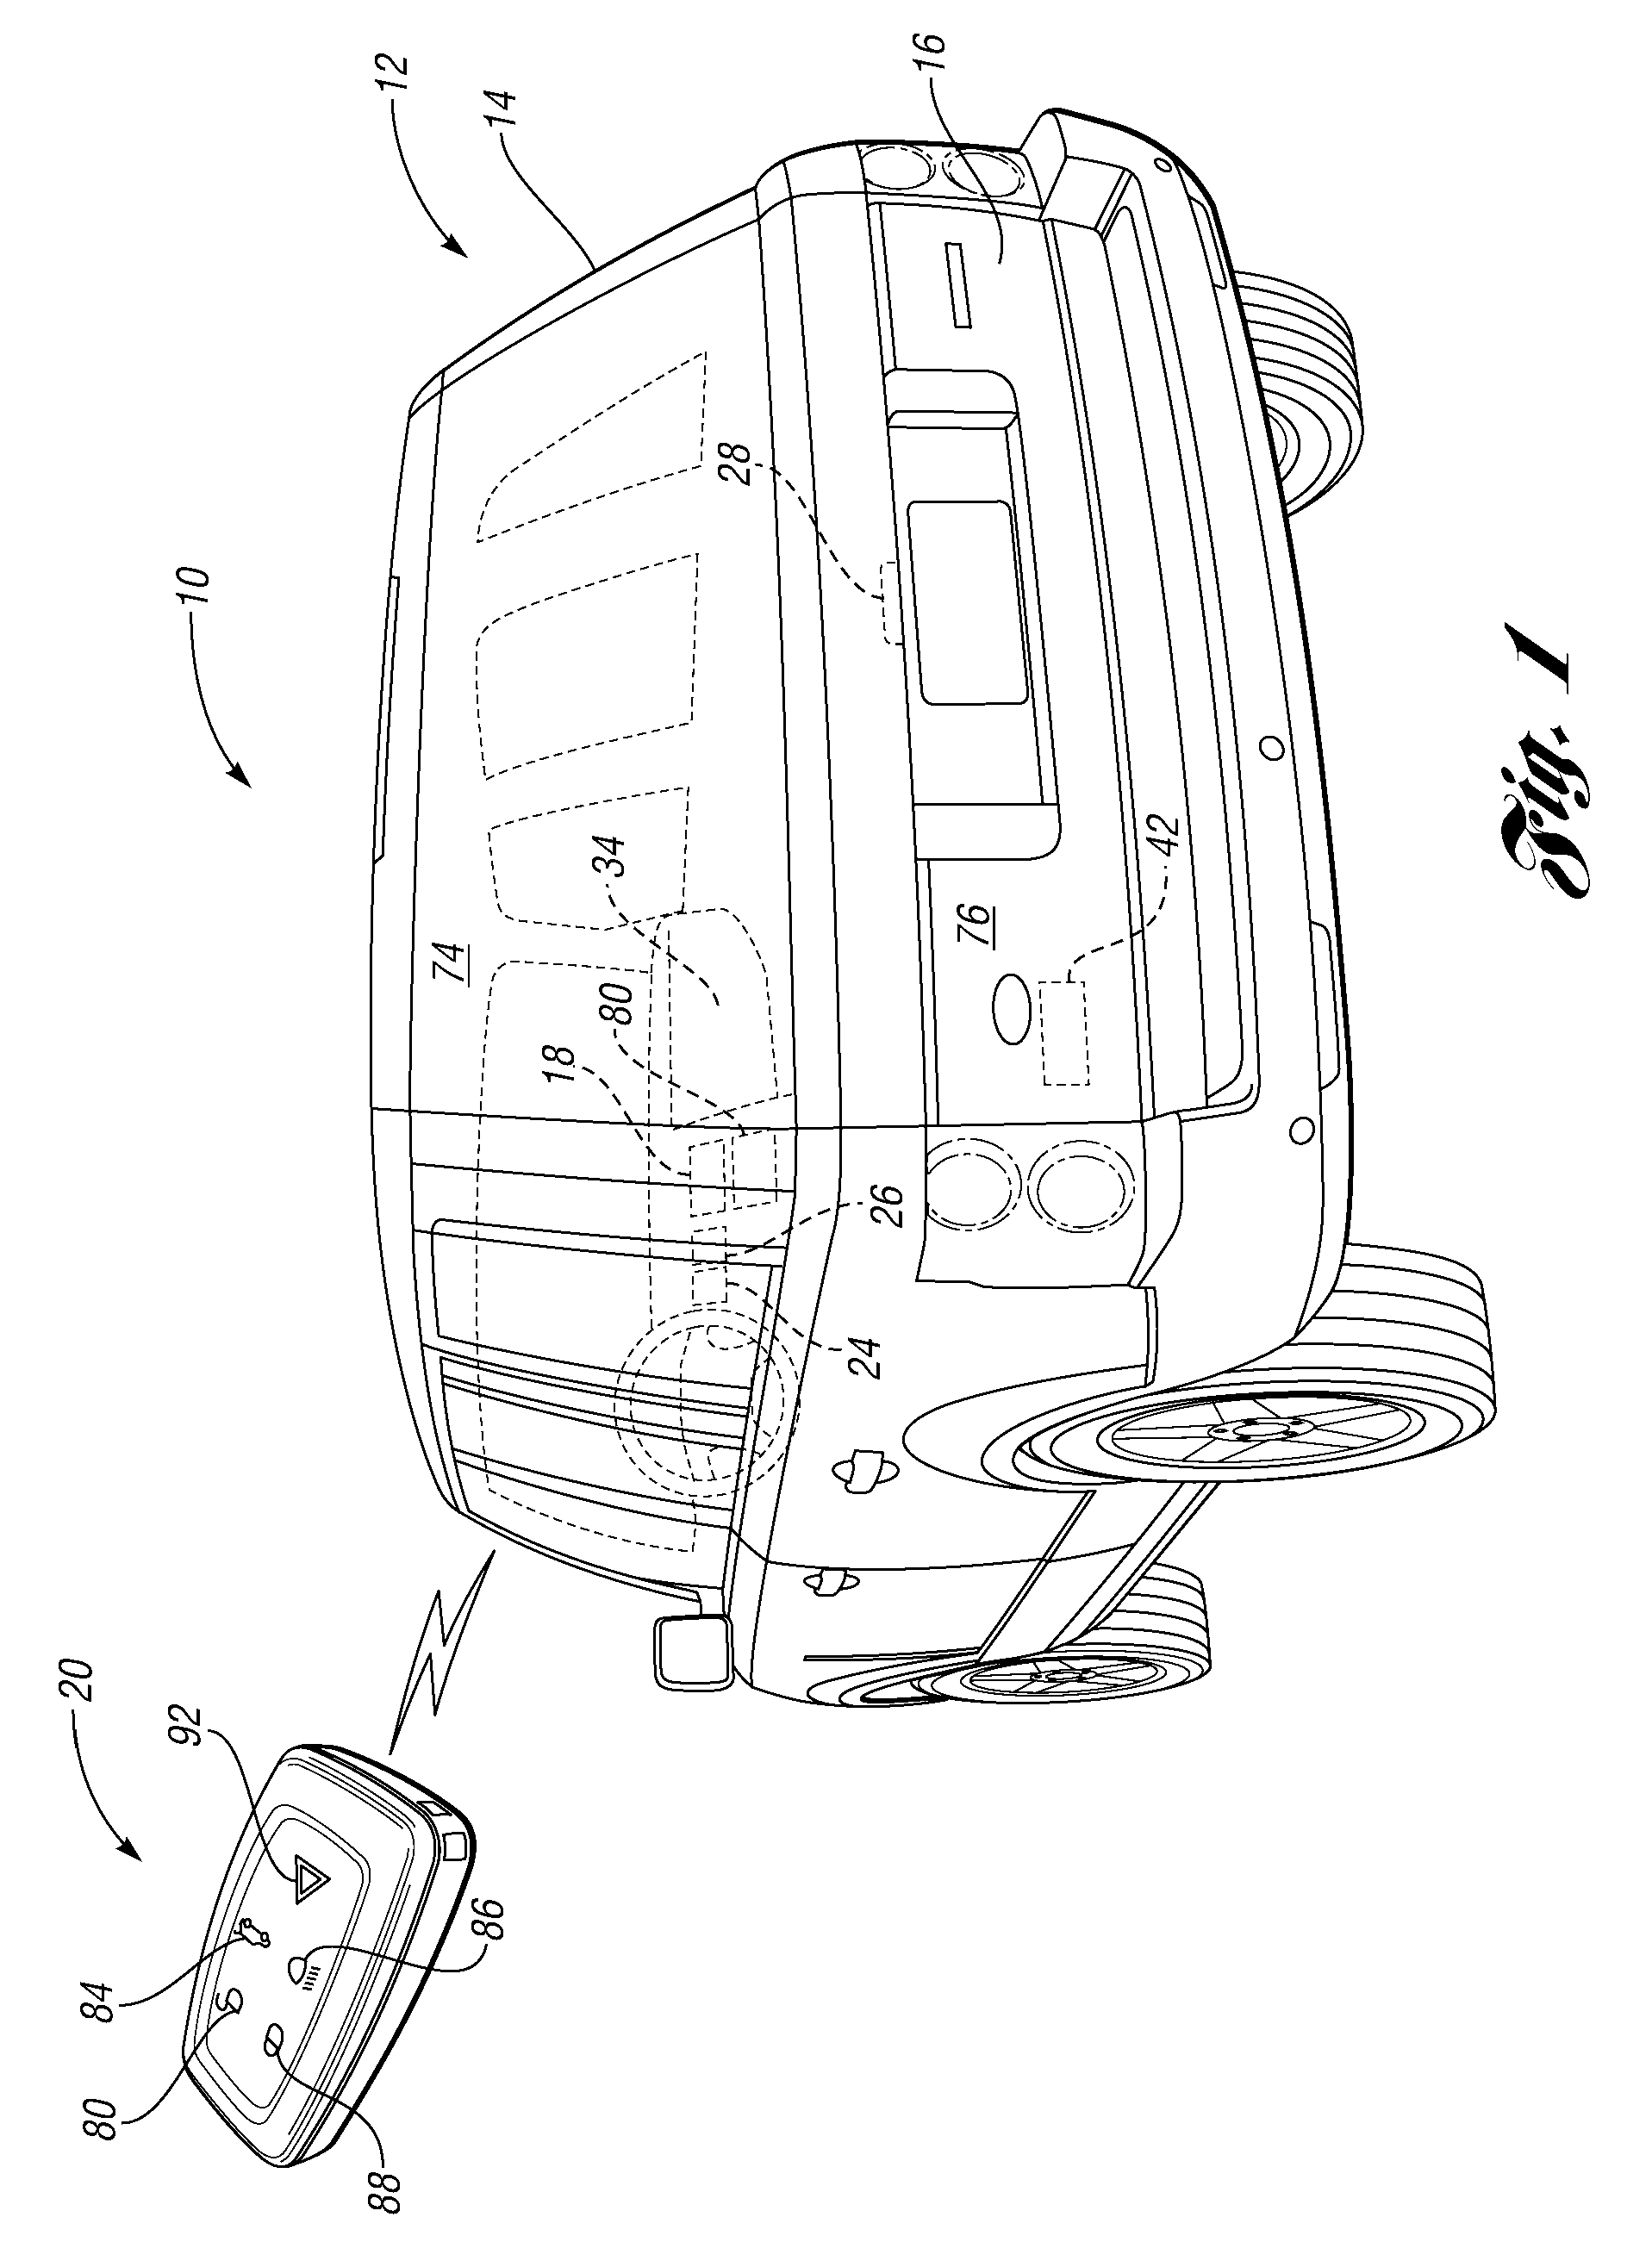 Power split tailgate system and method